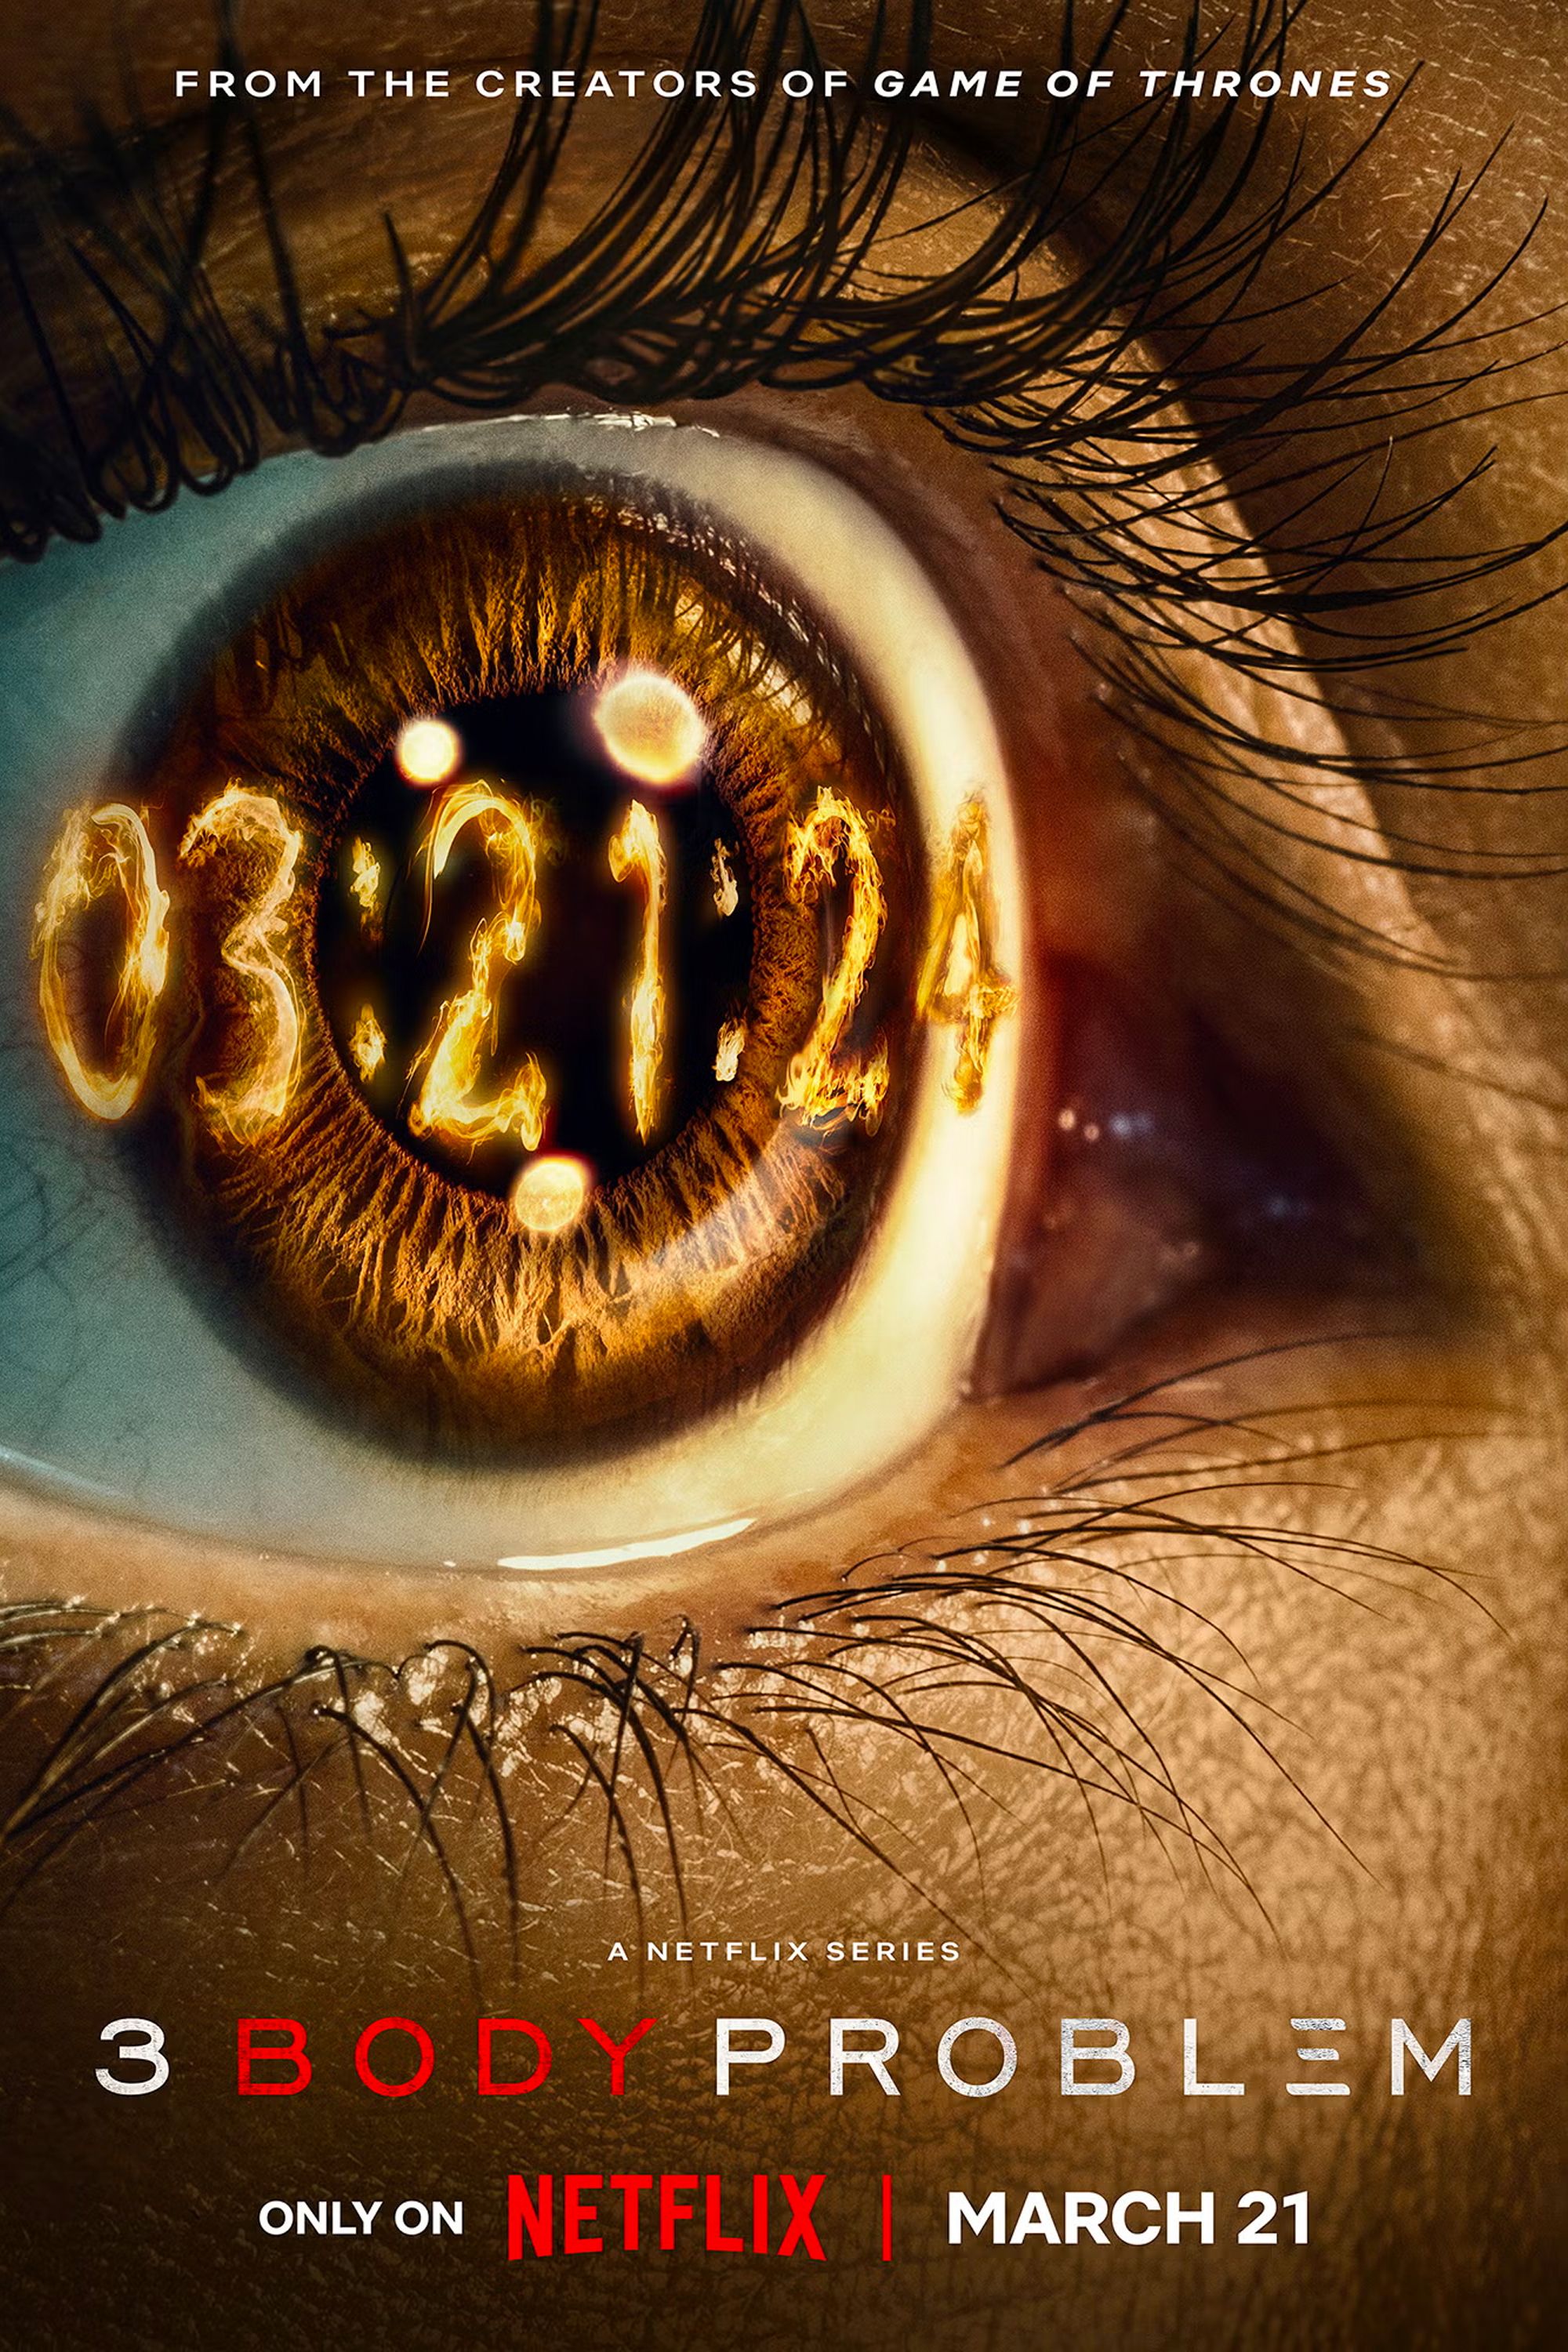 3 Body Problem Netflix Show Poster Featuring a Close-Up of an Eyeball with the release date 3-21-24 on the Pupil